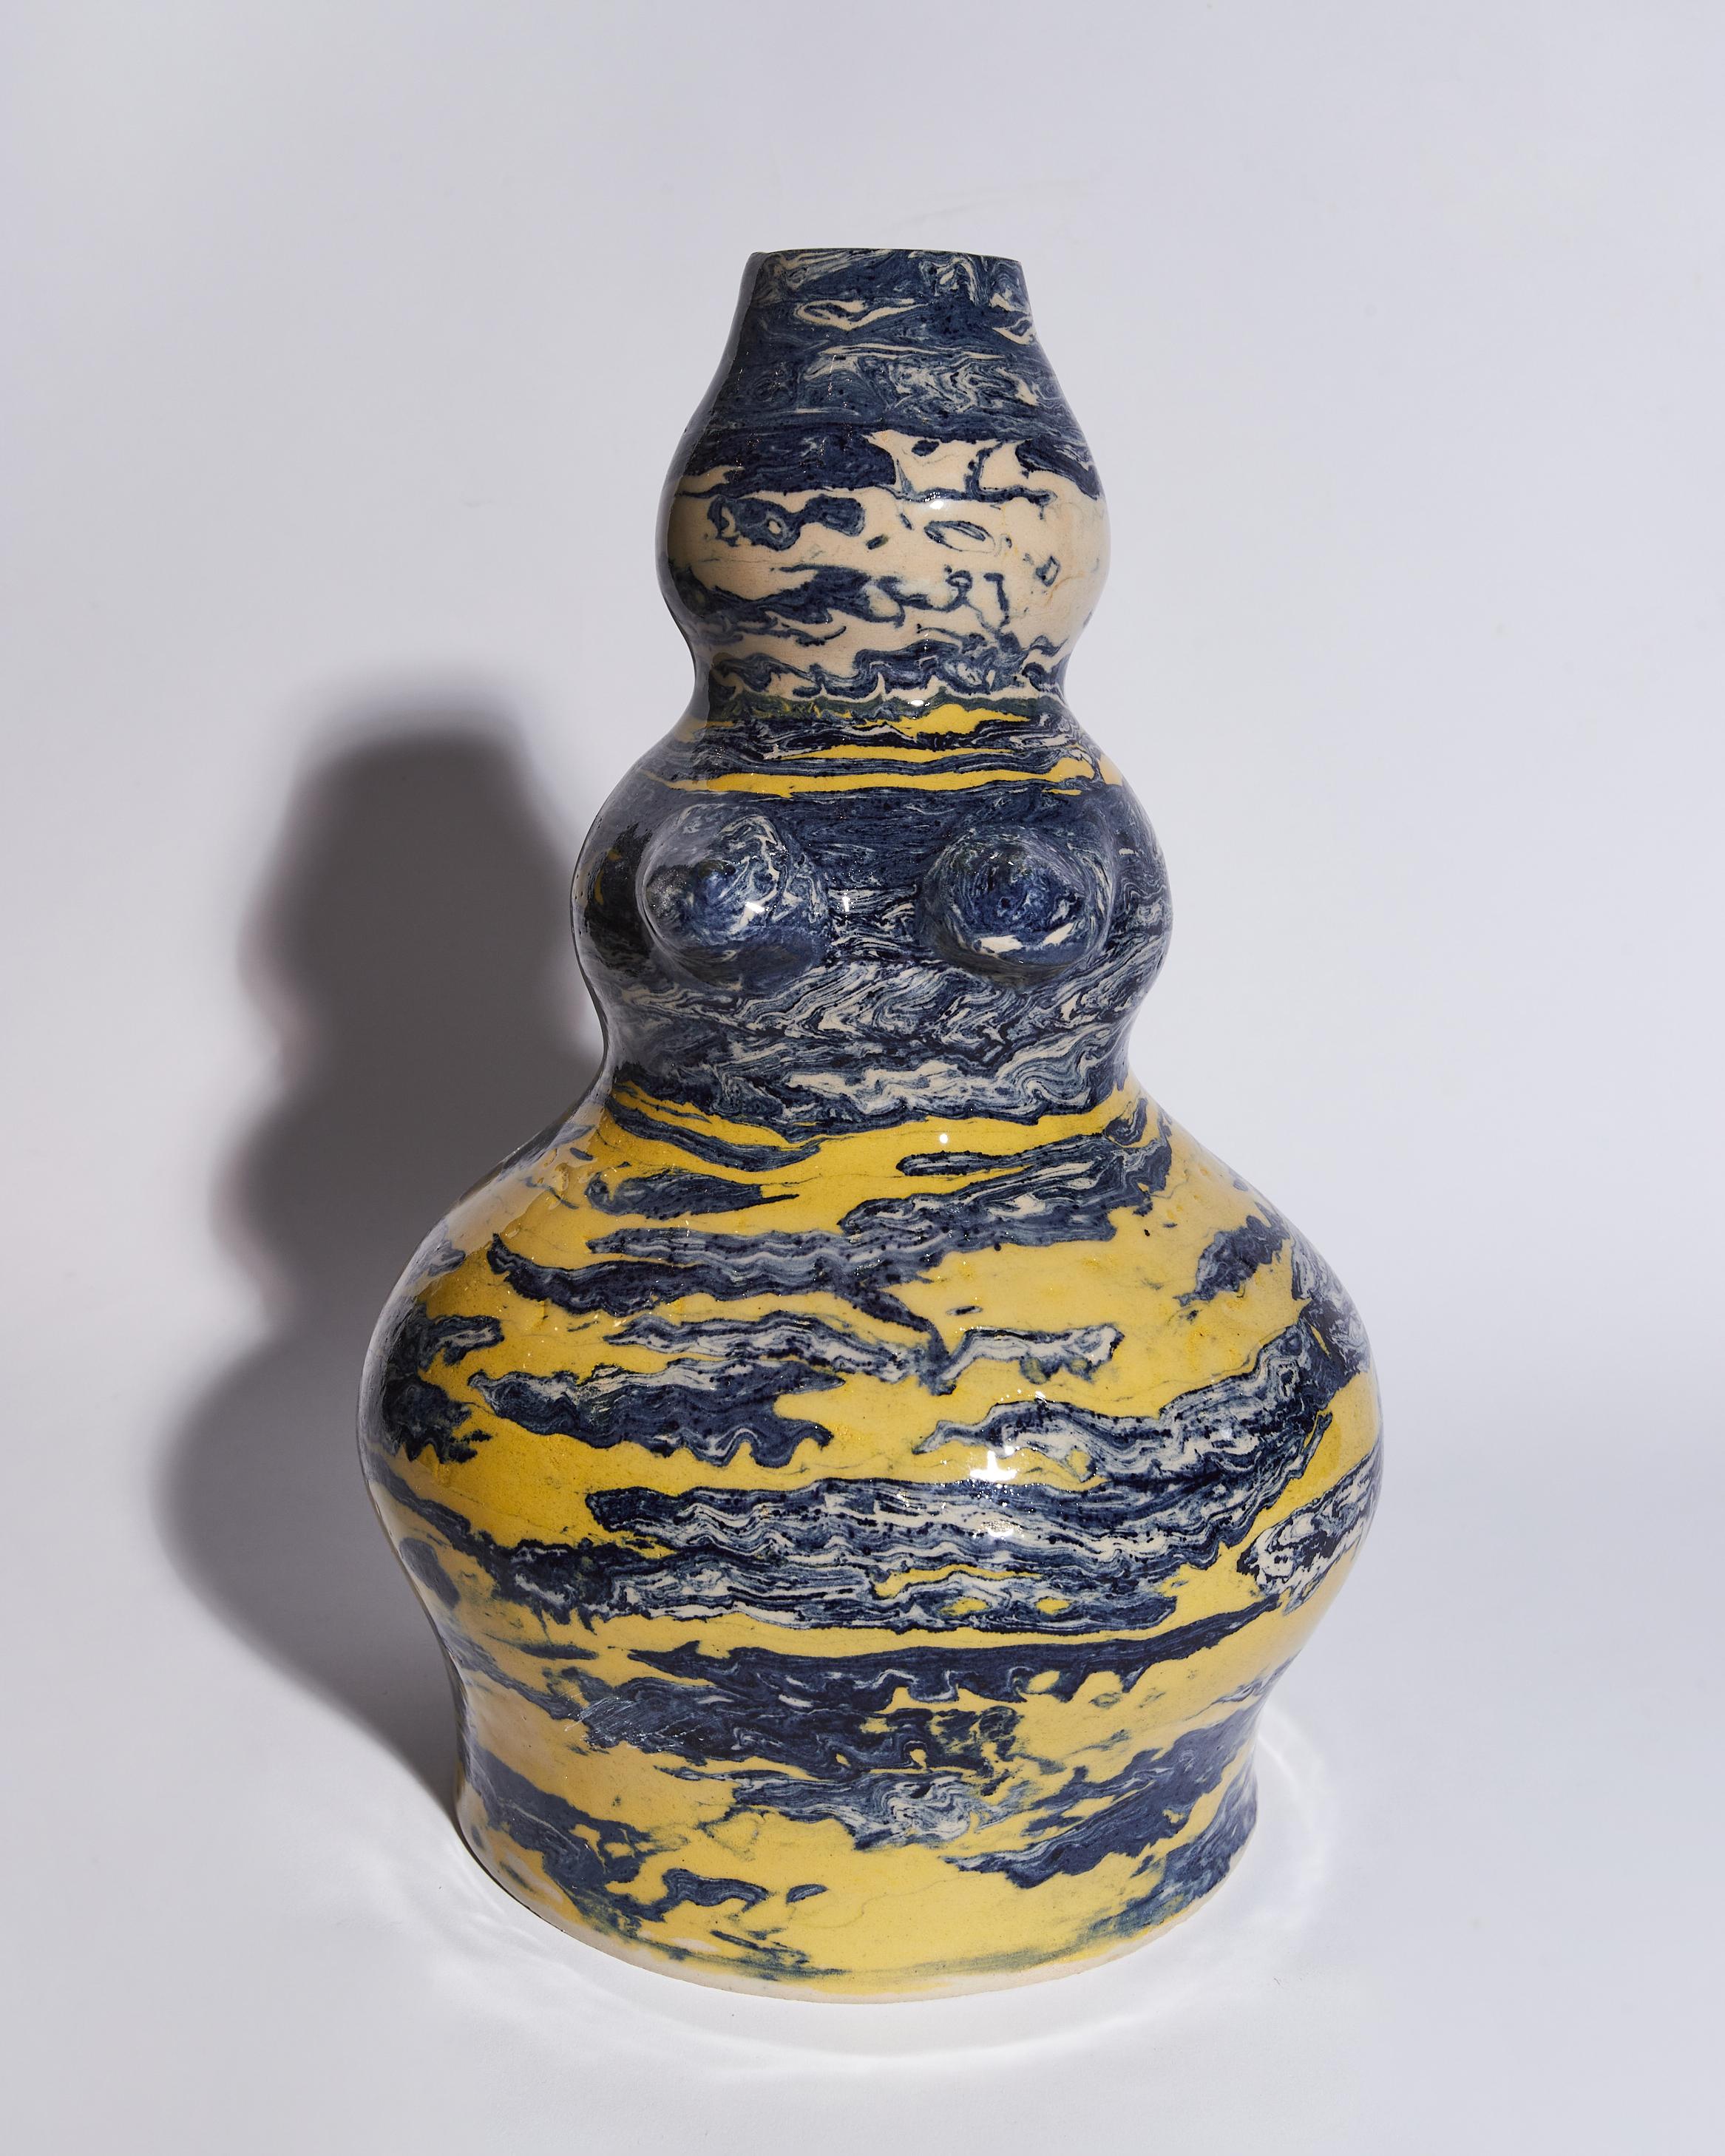 This piece is 100% handcrafted . The use of Cobalt oxide and yellow stain gives an Asian aesthetic to the vase . 
My inspiration comes from the ancient anatomical votive offerings. These were clay body parts that the ancient Greeks offered to the